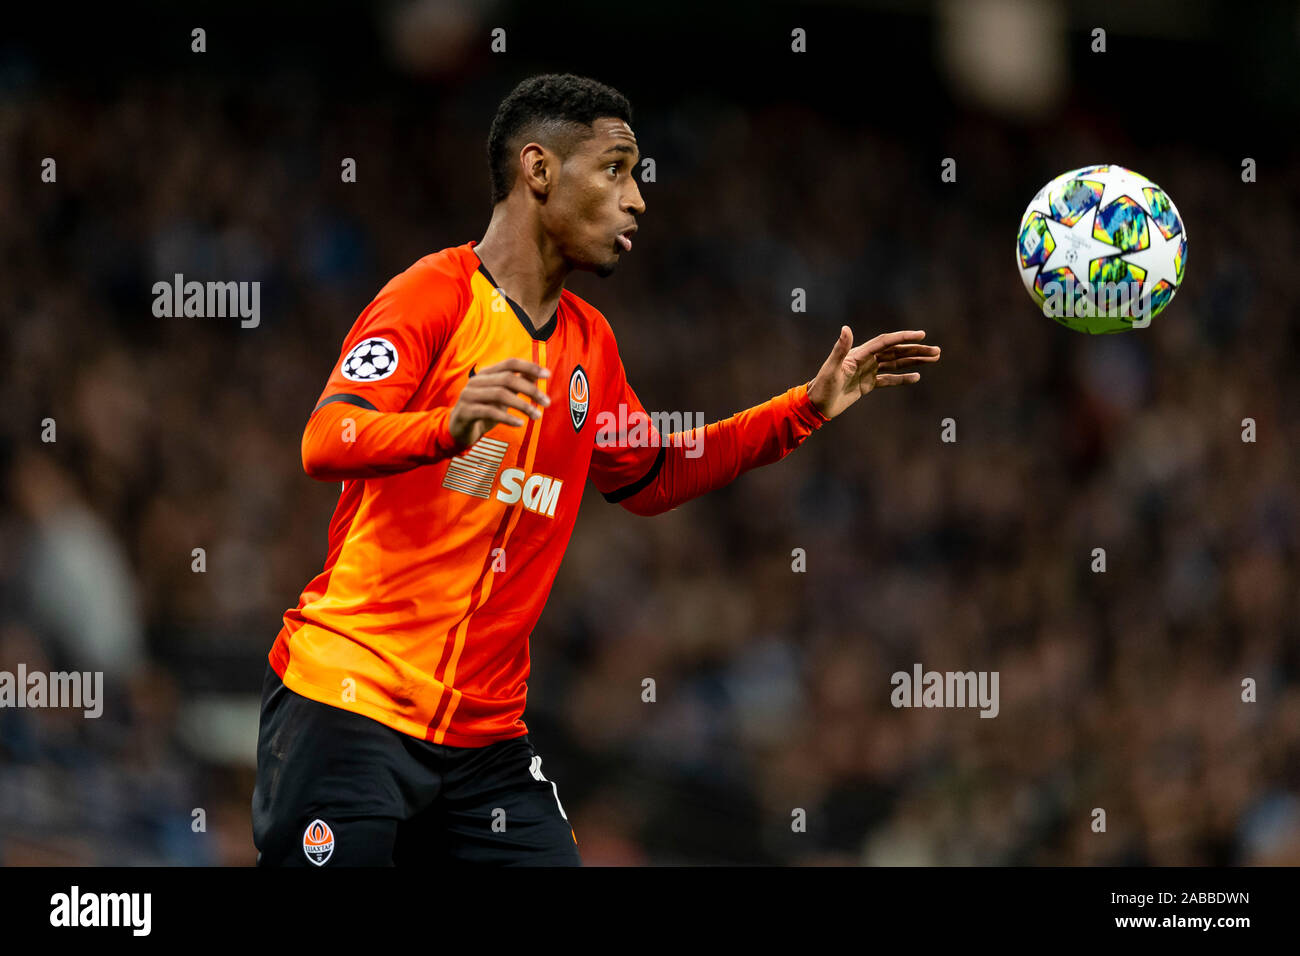 Manchester, UK. 26th Nov, 2019. Tete of Shakhtar Donetsk during the UEFA Champions League Group C match between Manchester City and Shakhtar Donetsk at the Etihad Stadium on November 26th 2019 in Manchester, England. (Photo by Daniel Chesterton/phcimages.com) Credit: PHC Images/Alamy Live News Stock Photo